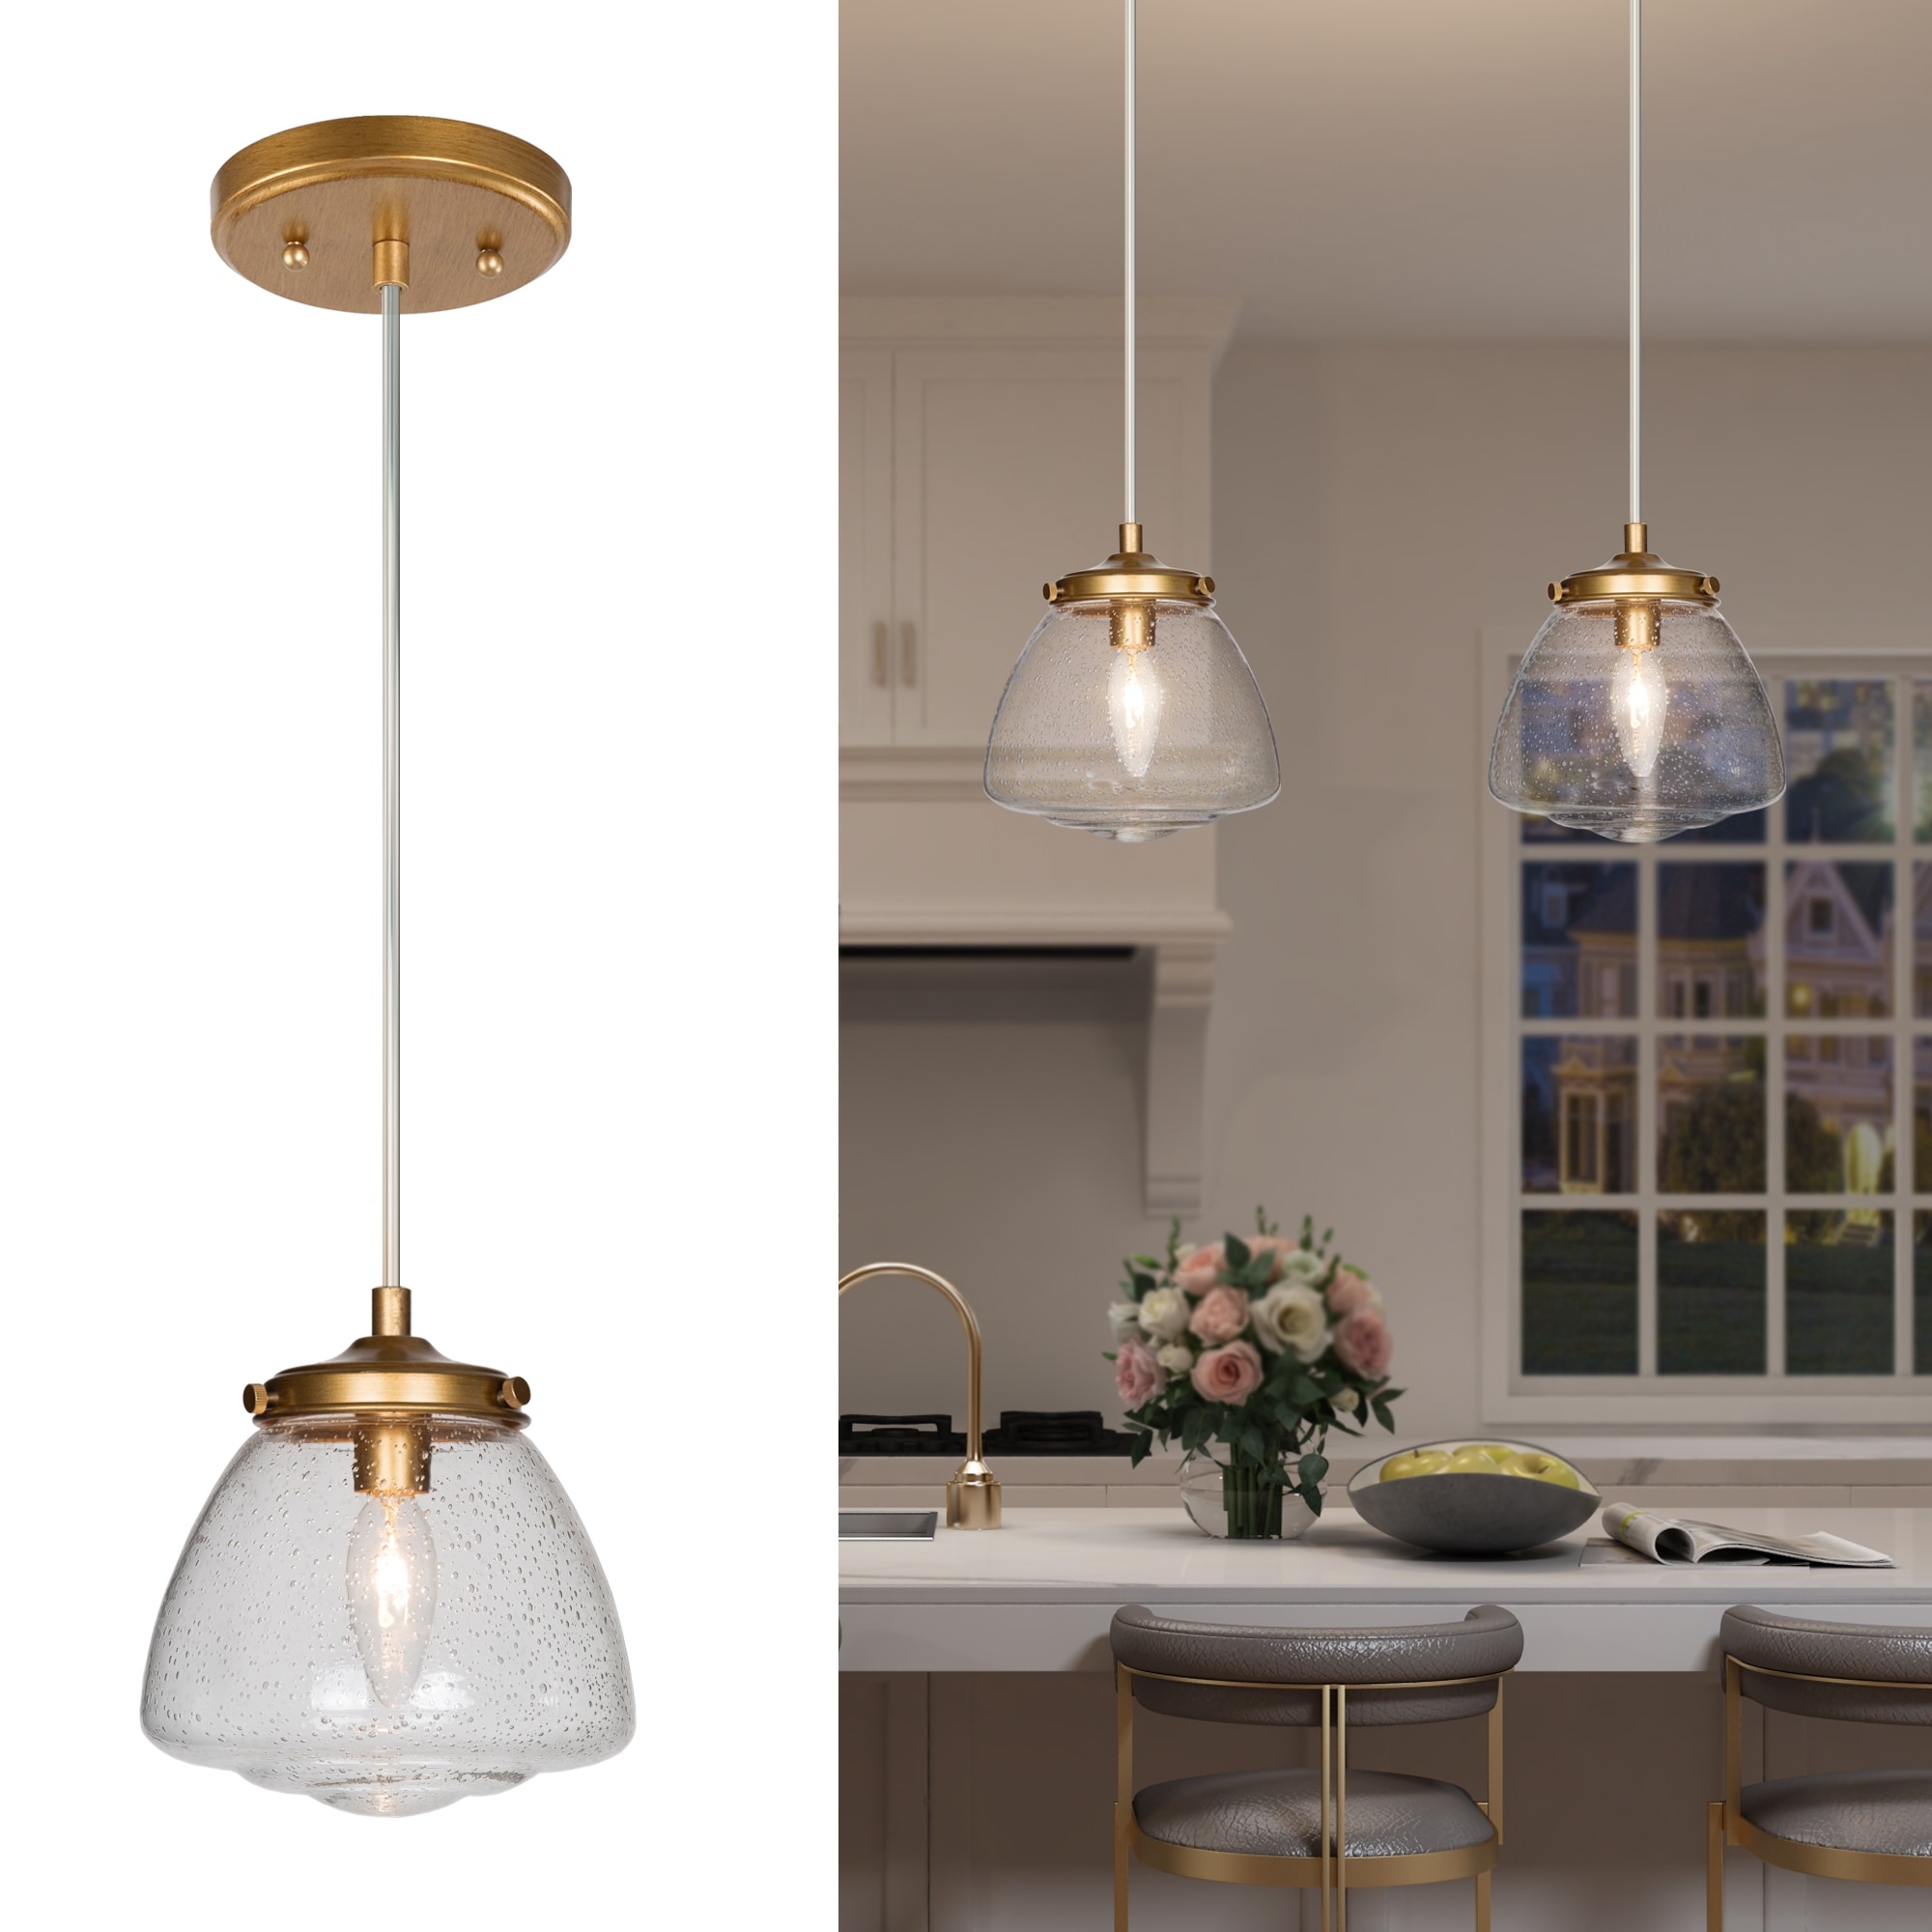 UMhouse Modern White Globe Glass Pendant Light Fixtures,Brass and Glass Chandelier Ceiling Lamp,Gold Hanging Lamp for Kitchen Island